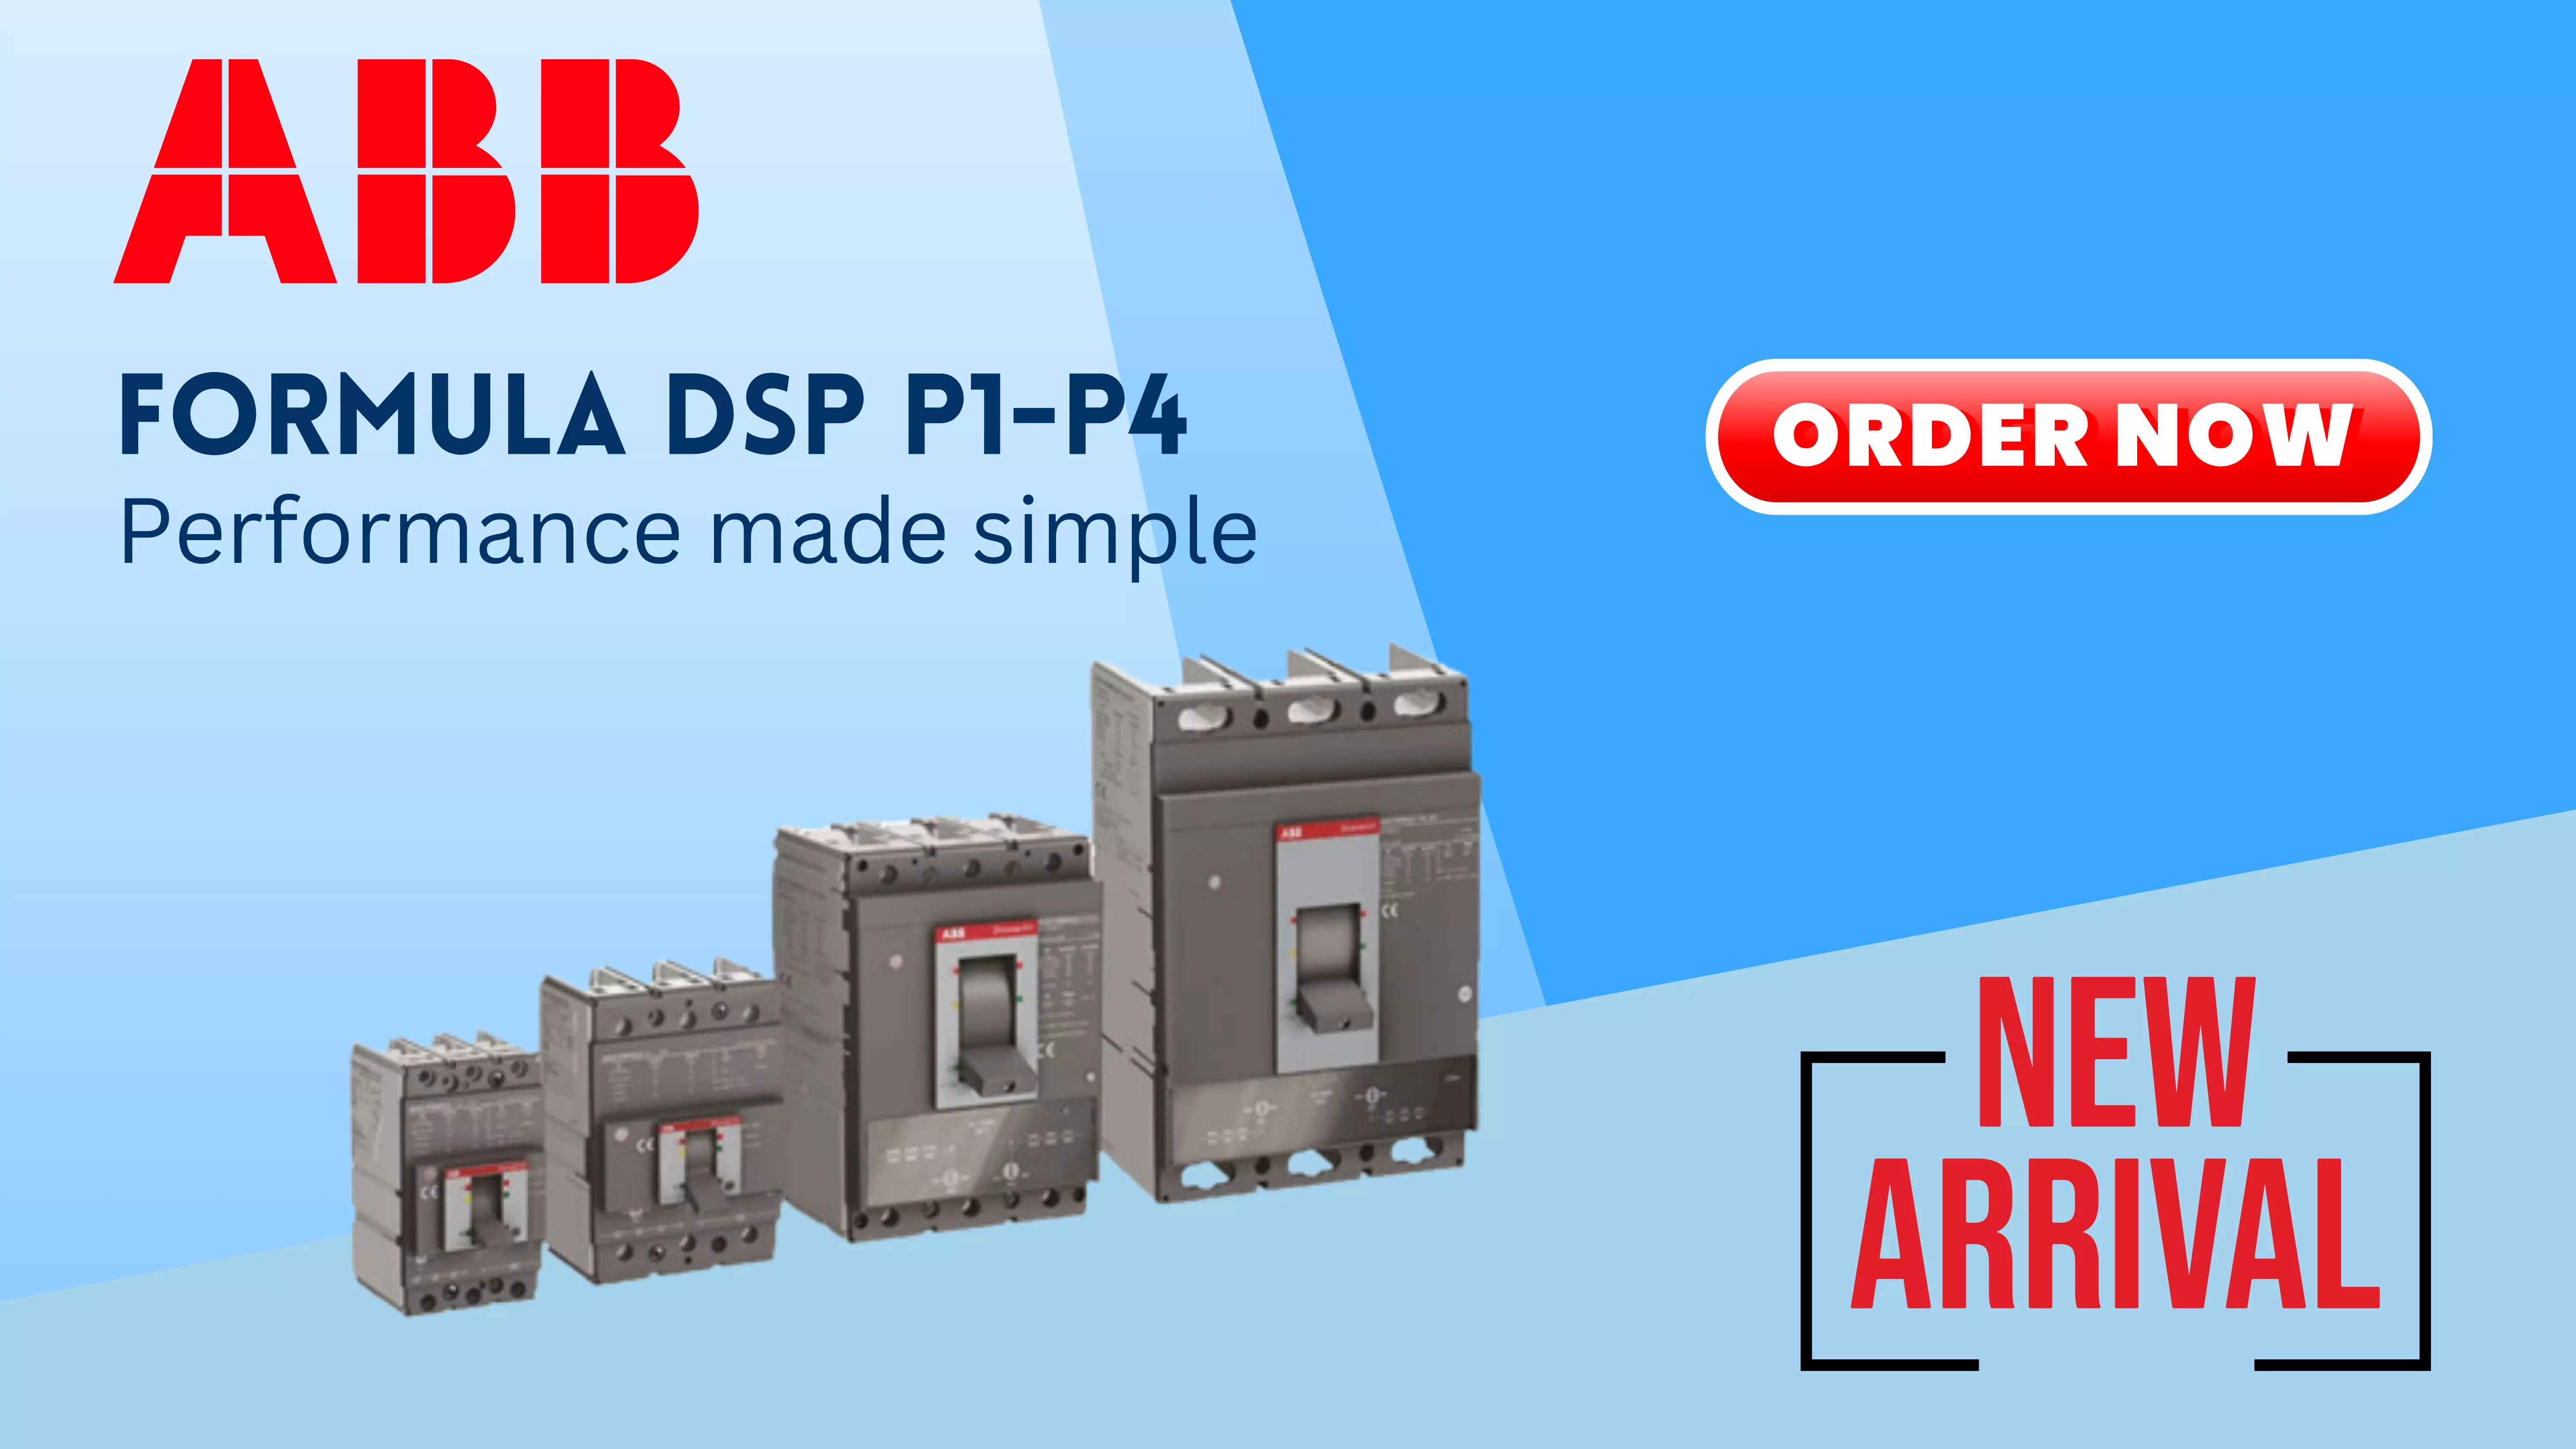 ABB DSP Products